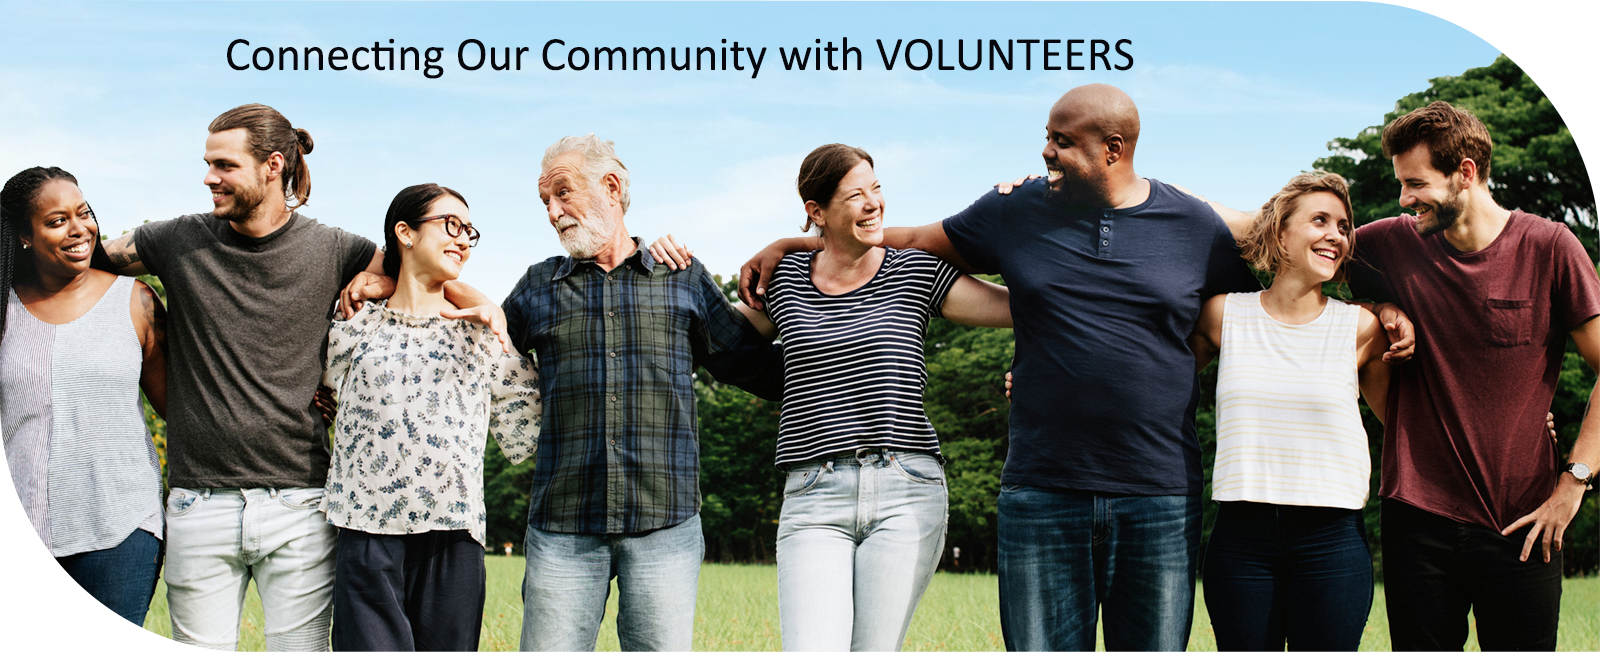 Connecting our community with volunteers